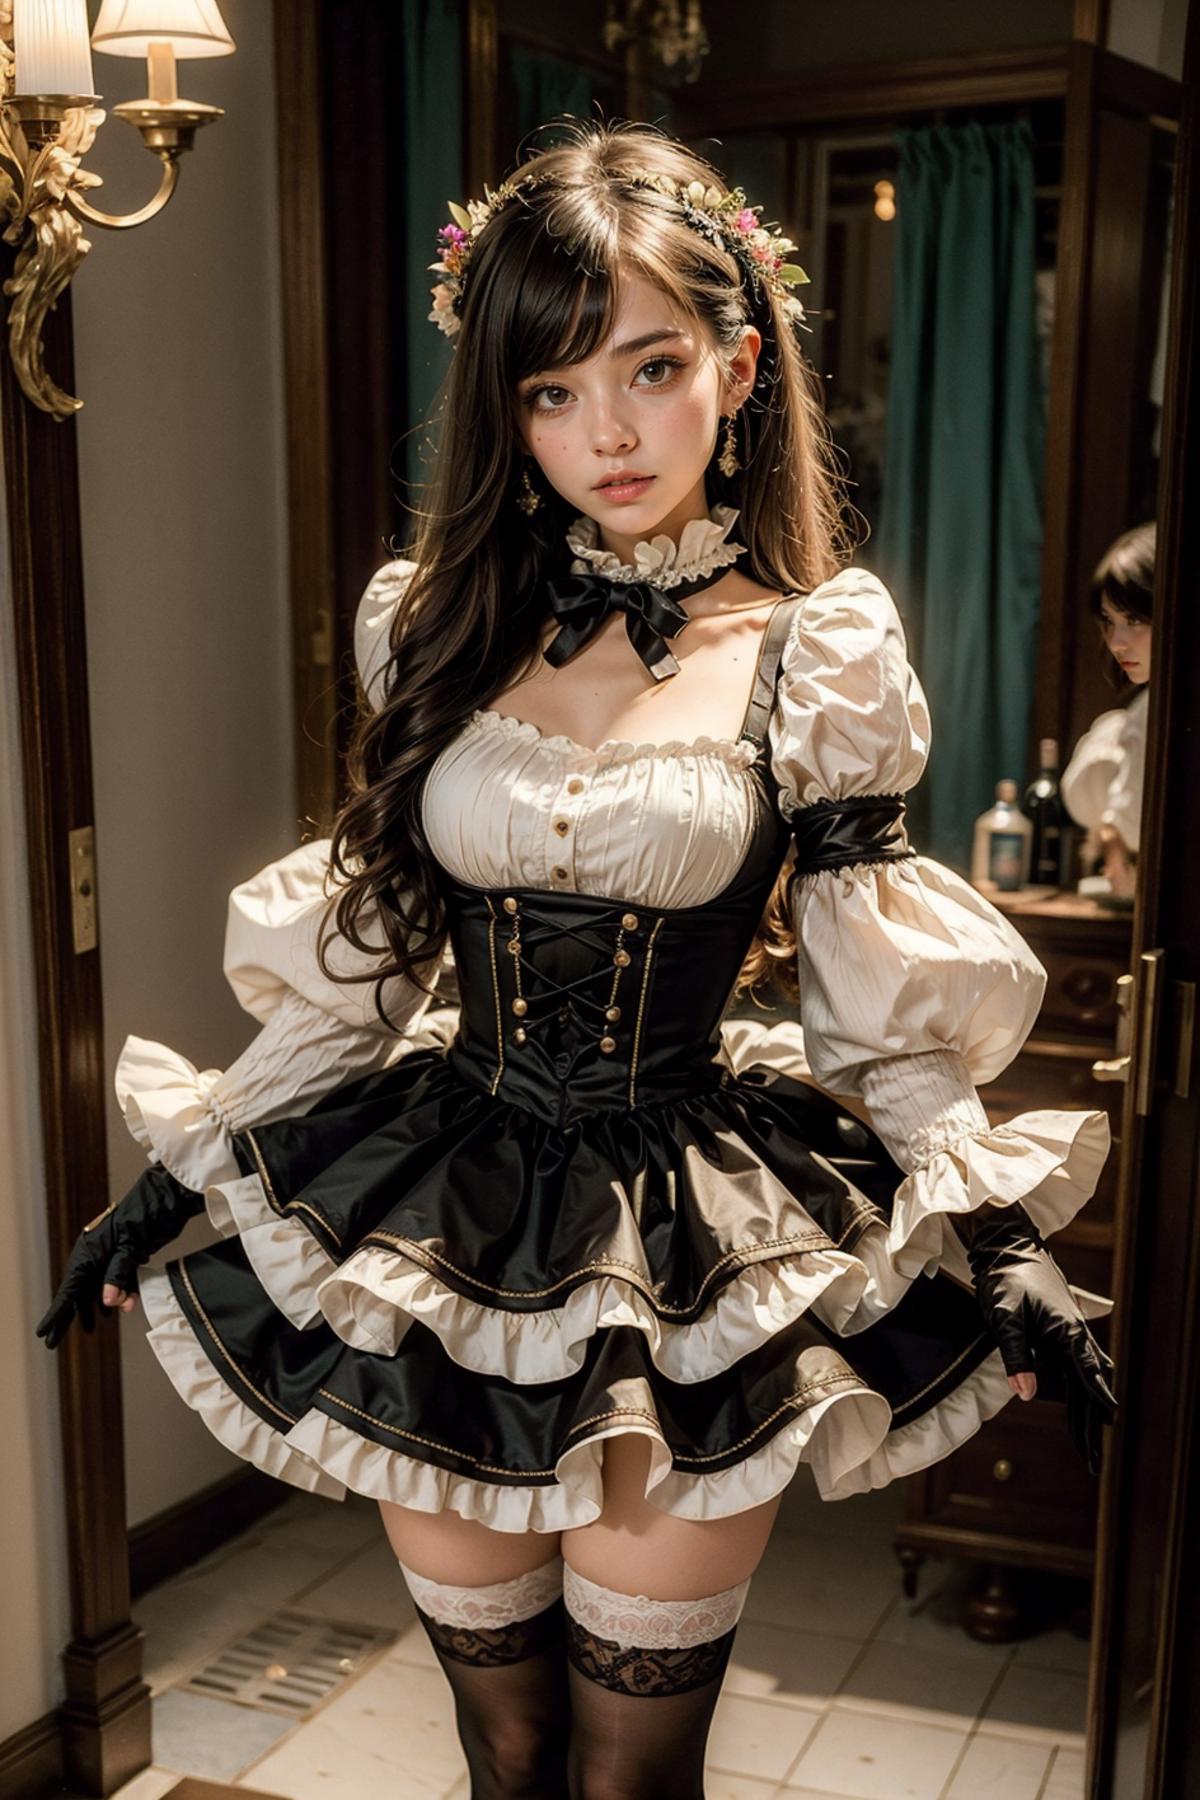 A woman in a Victorian-style dress with lace and black accents poses in a room.